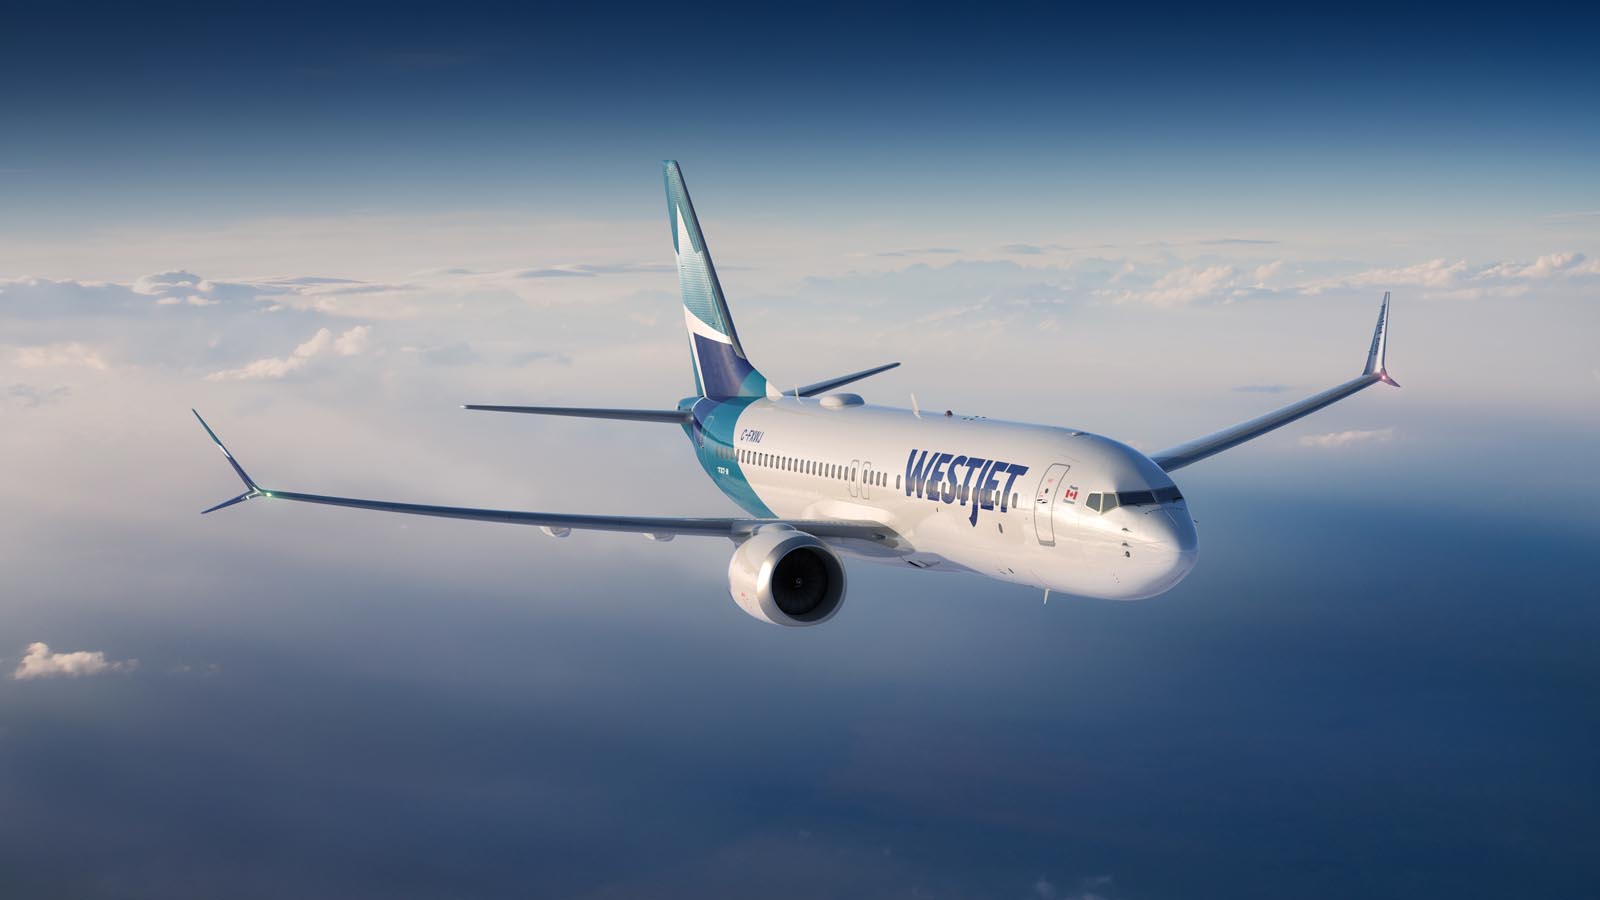 WestJet Airlines is certified as a 3-Star Airline